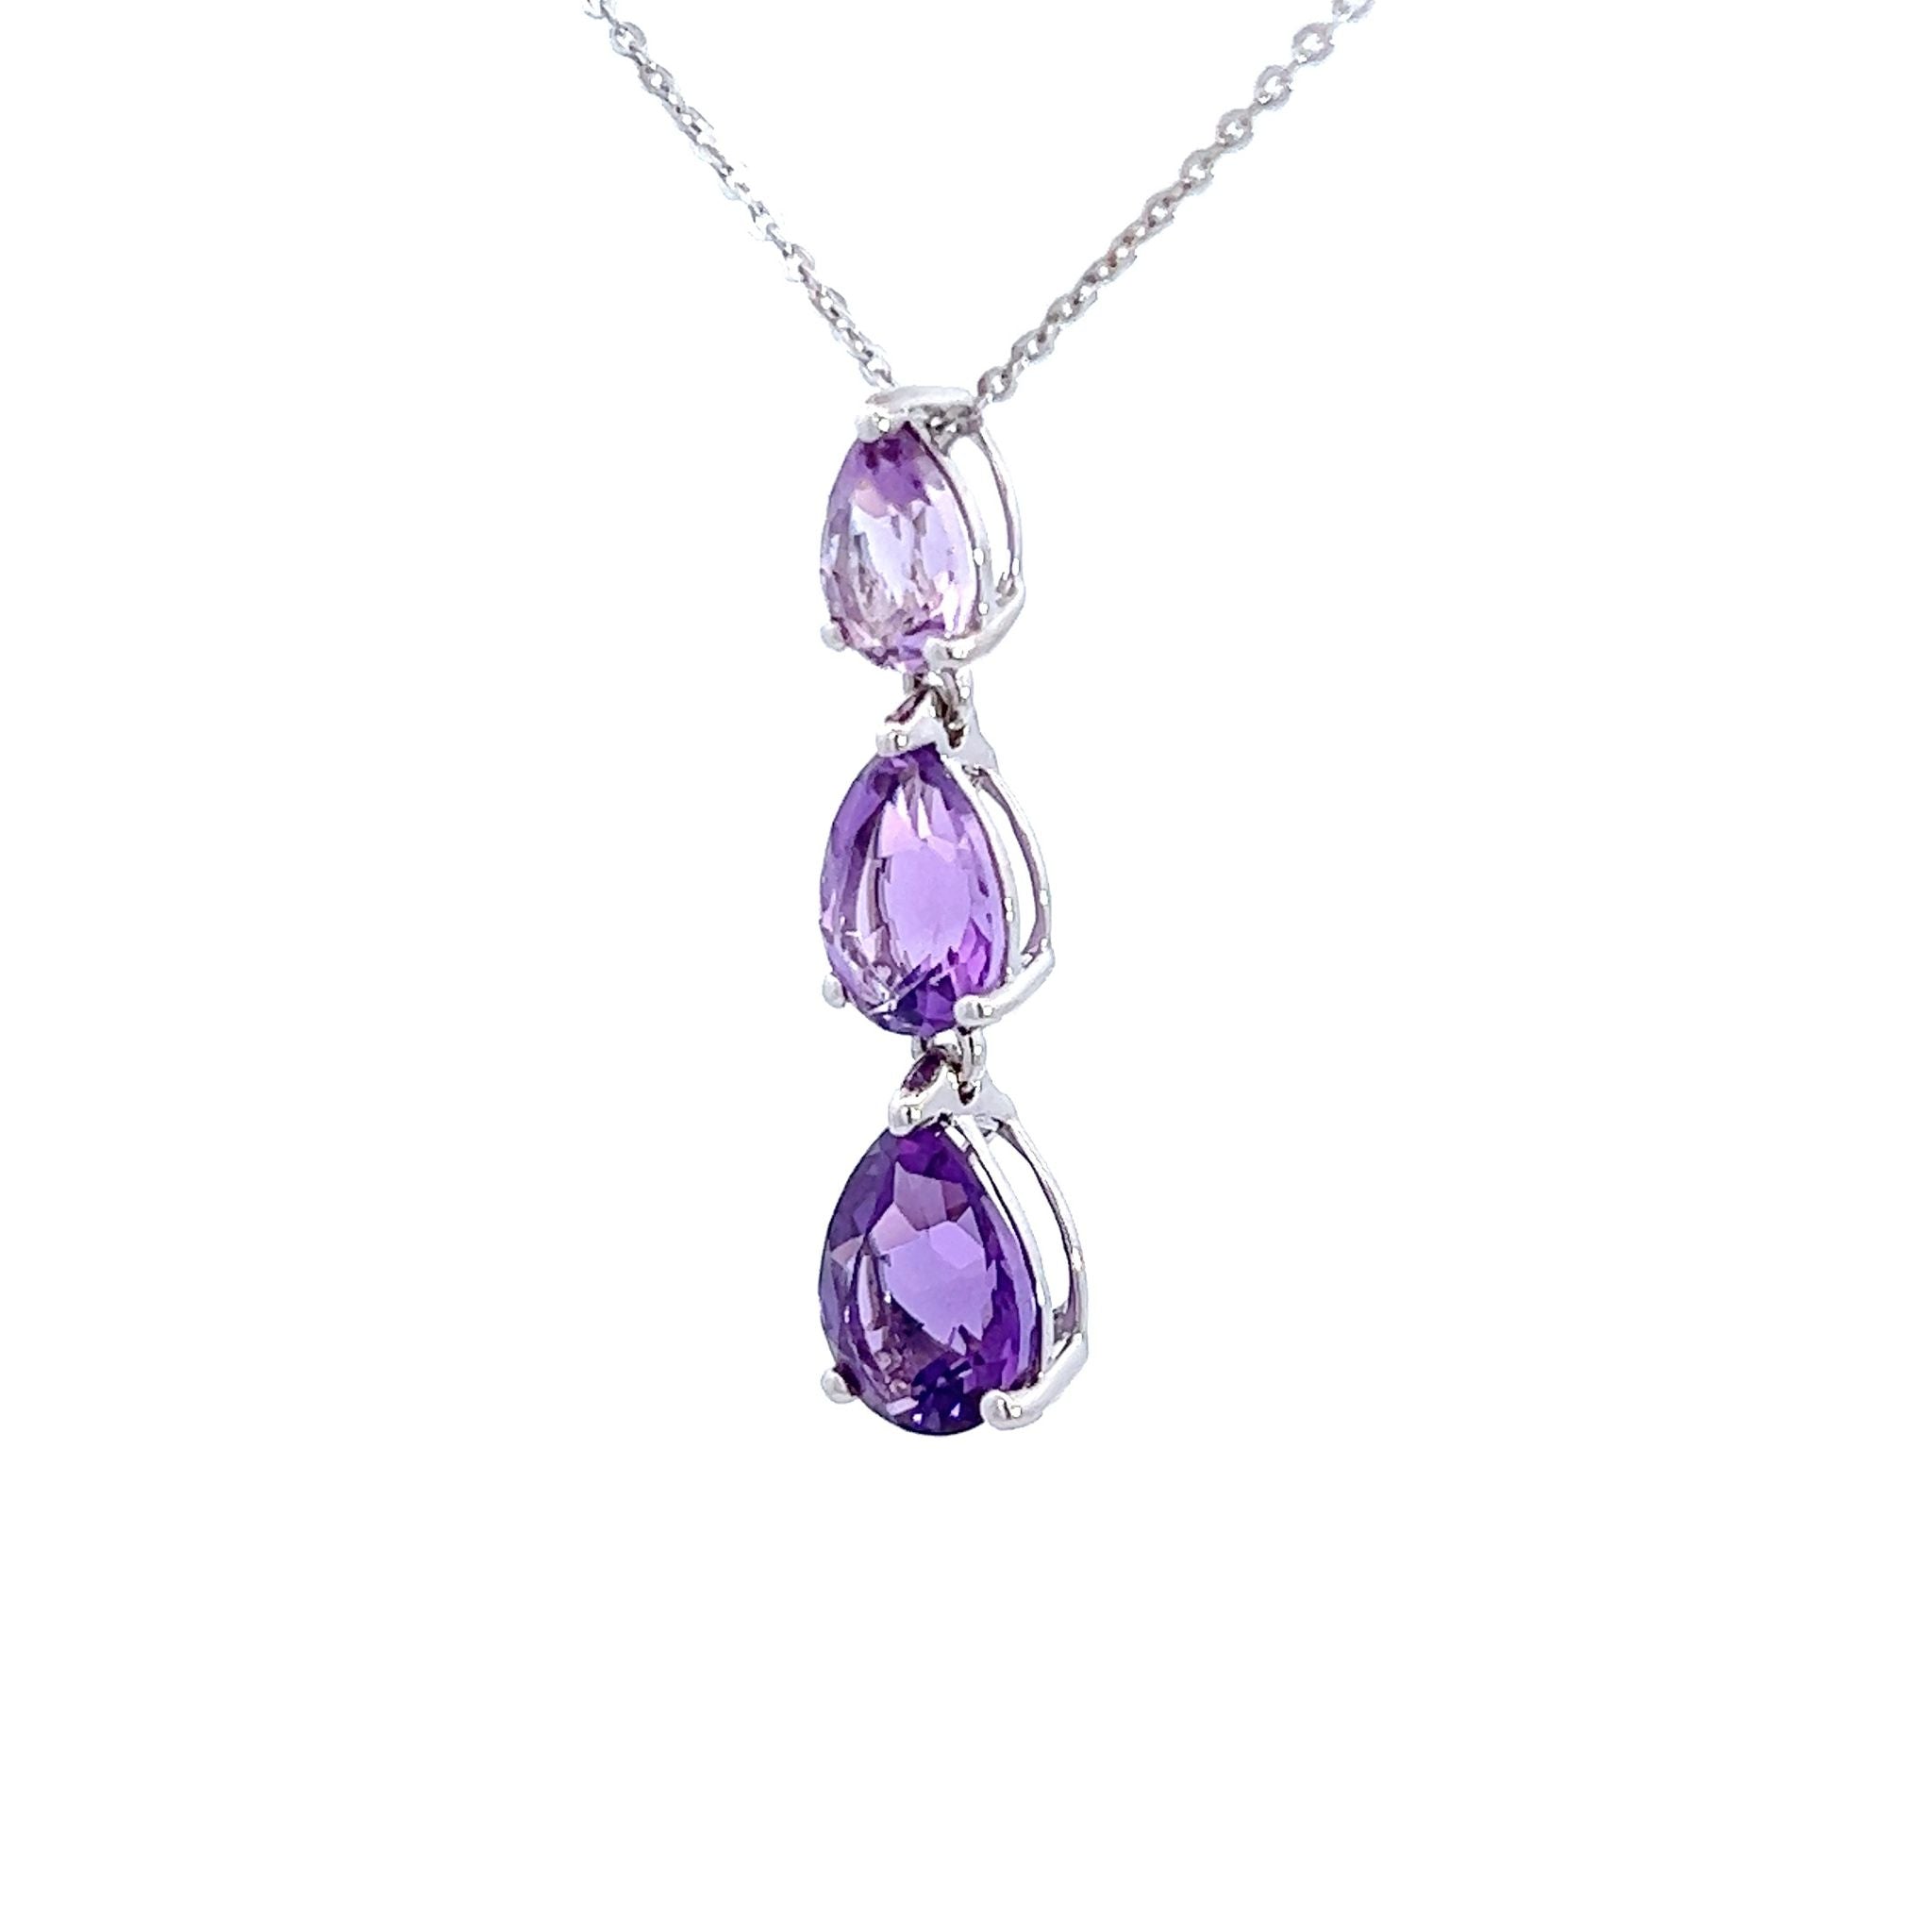 Raw Amethyst Crystal Pendant Necklace – Rock Your World